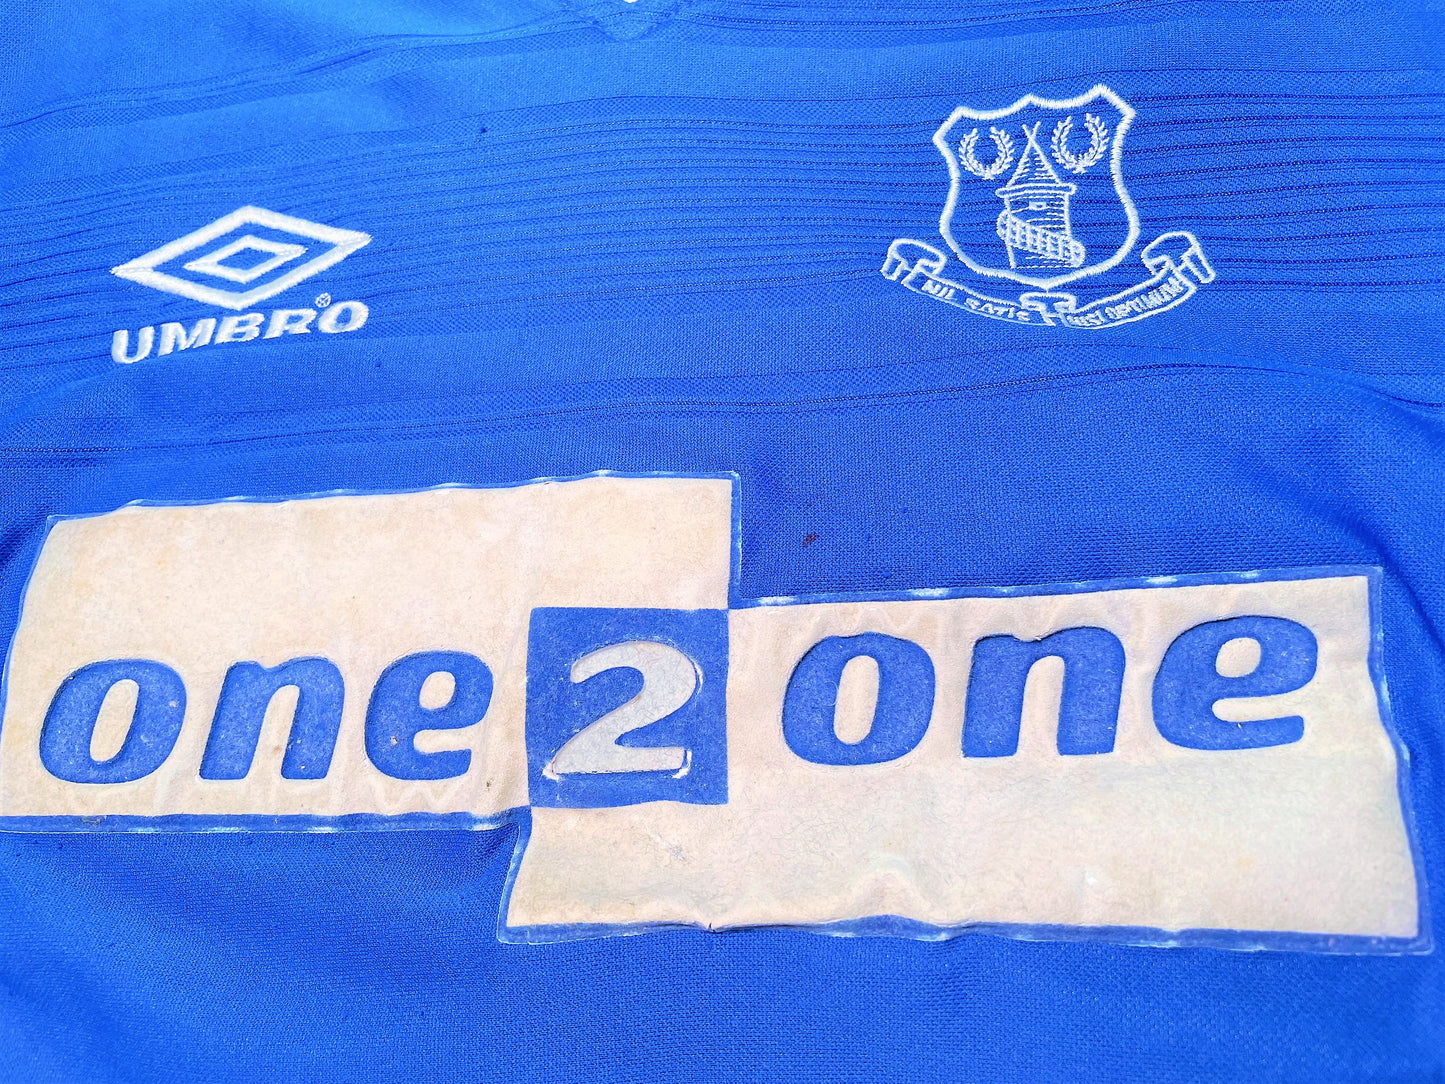 Everton Home Shirt 1999 (average) Childs 9 to 10 years, size on label 134. Height 16 inches